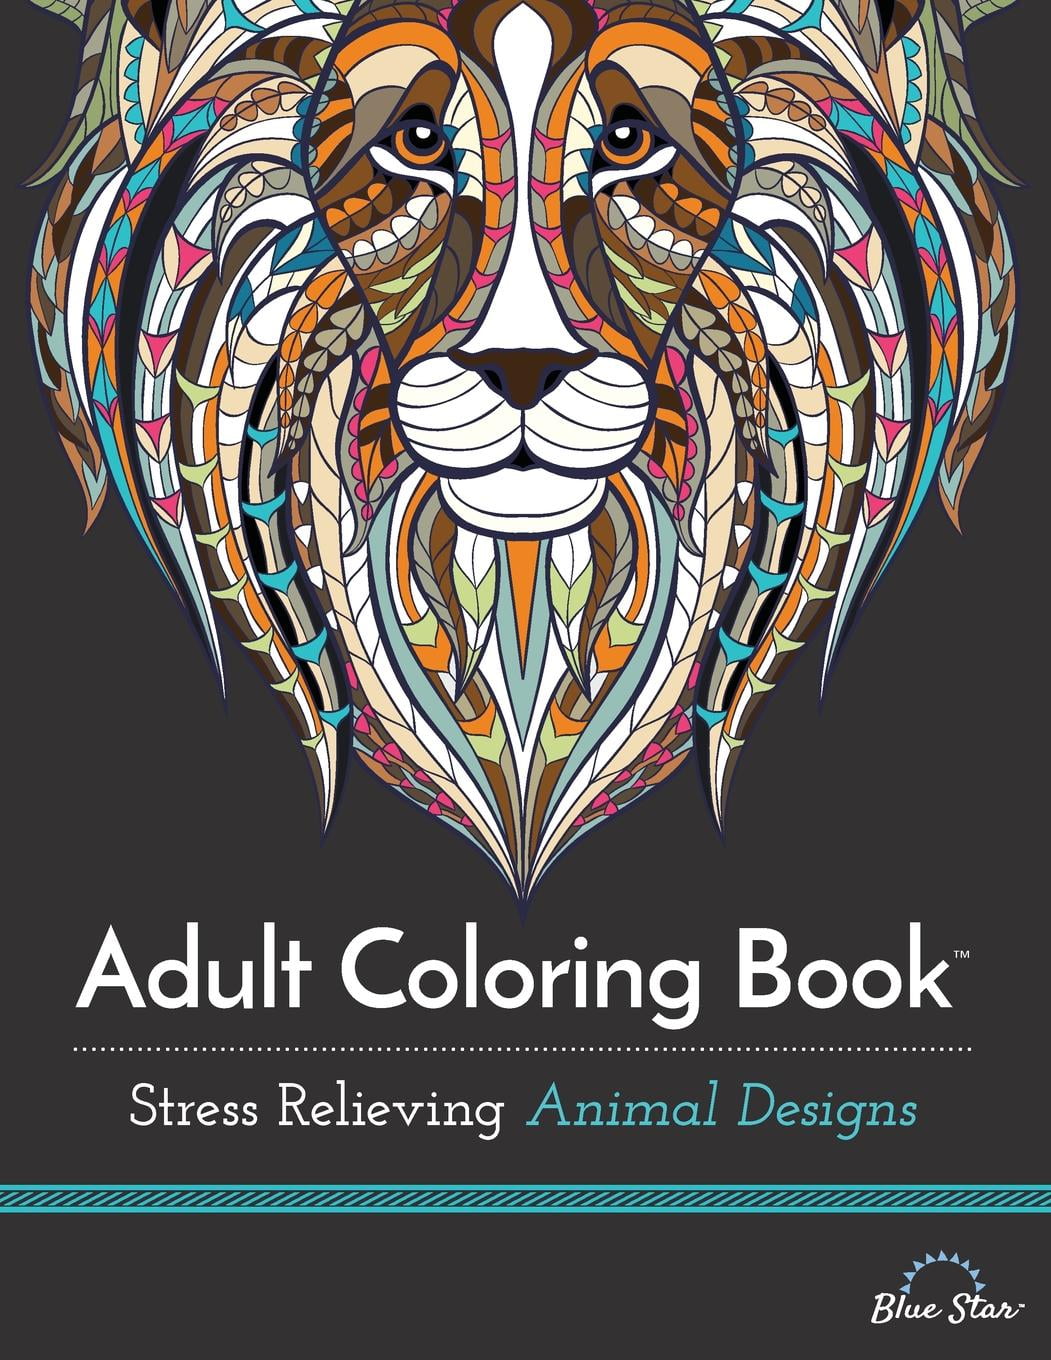 Adult Coloring Books Set.Three Books! Designs from The Sky, Land & Sea.  Coloring Books for Adults Relaxation 